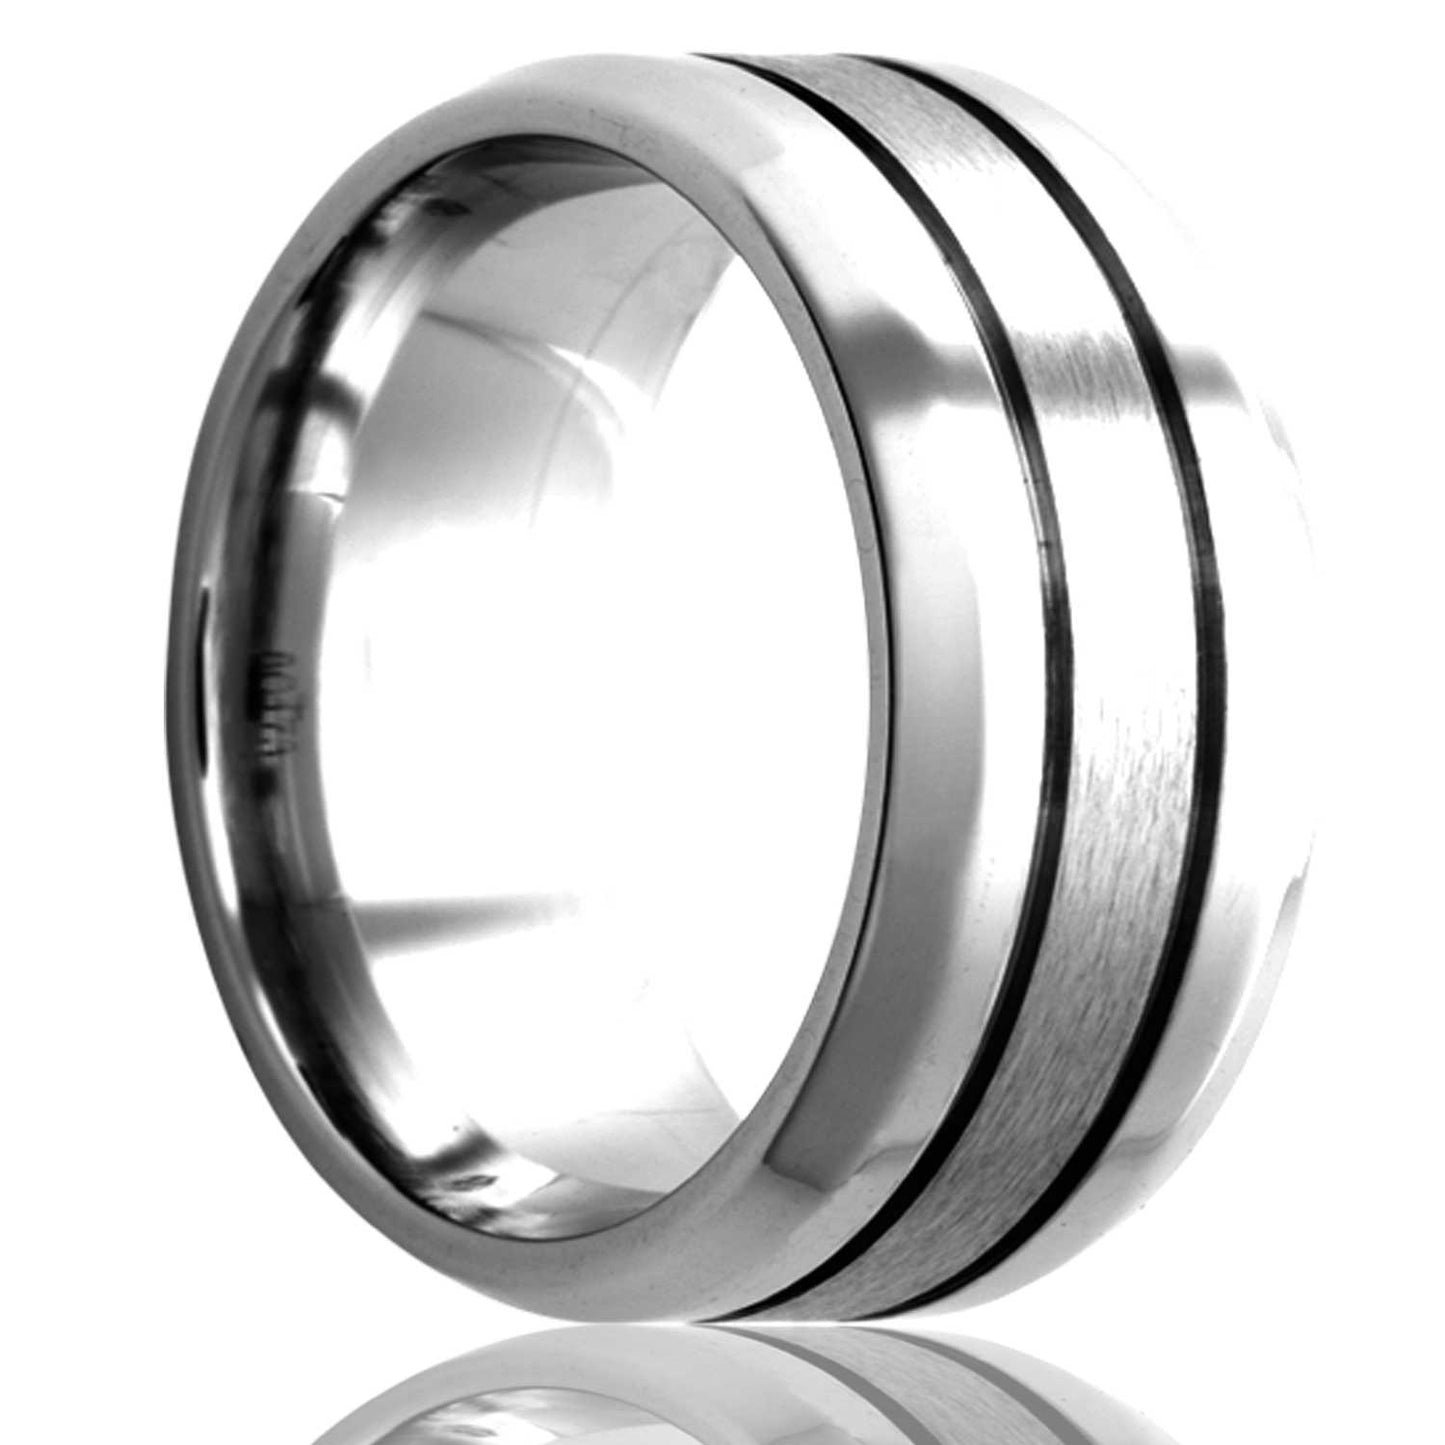 A satin finish grooved cobalt wedding band with beveled edges displayed on a neutral white background.